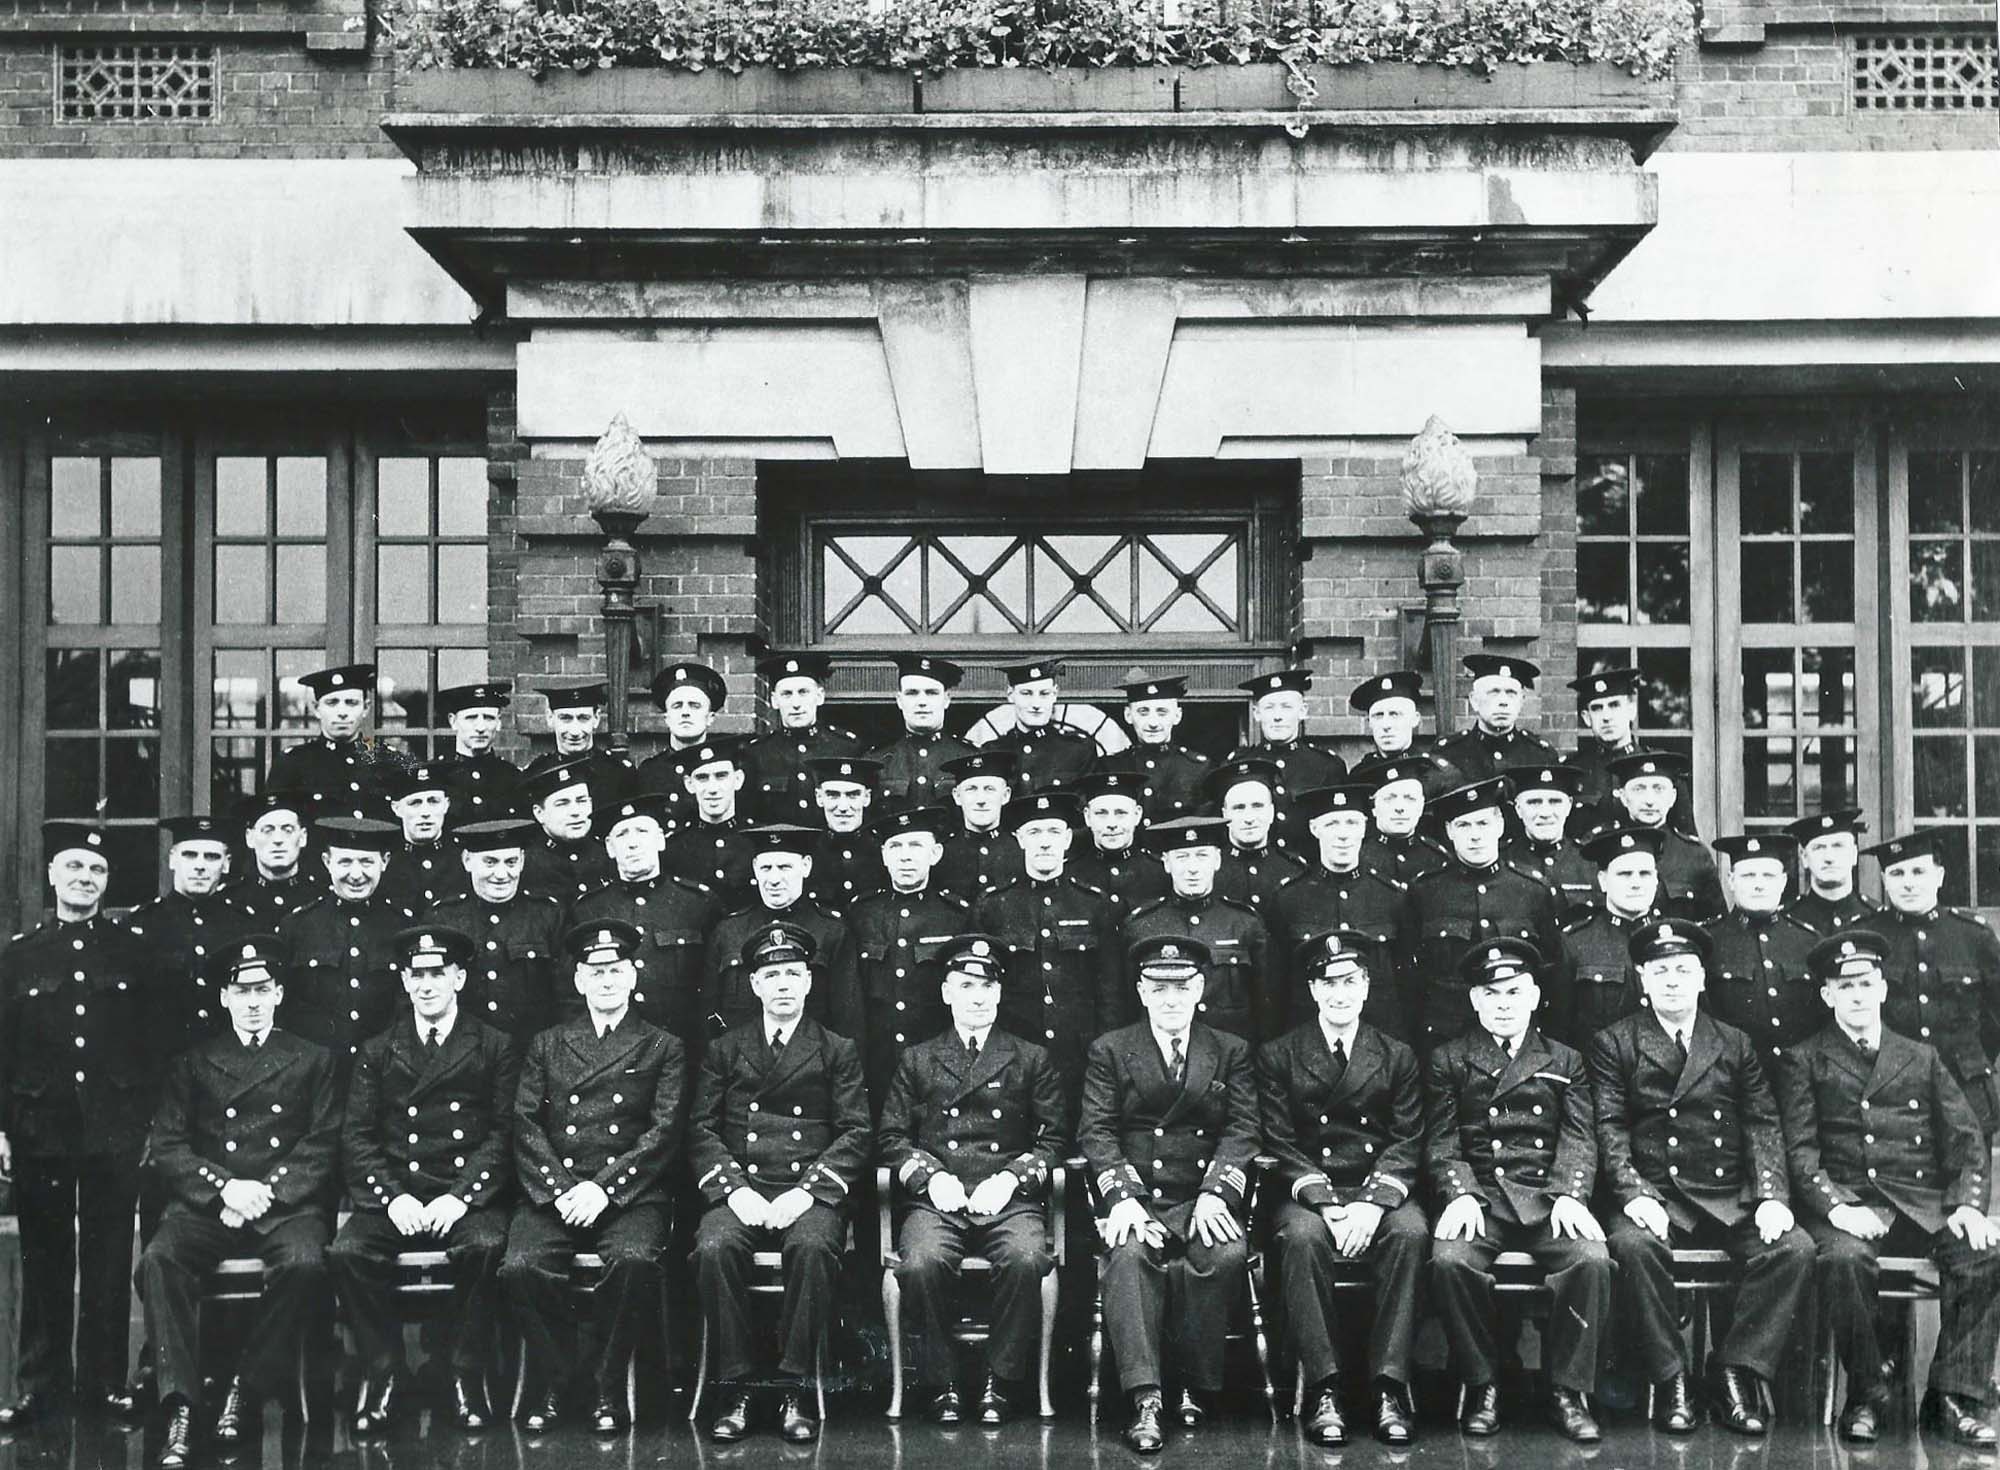 Fireman pose for a photo around 1936, possibly at a retirement get together - Malc Tovey